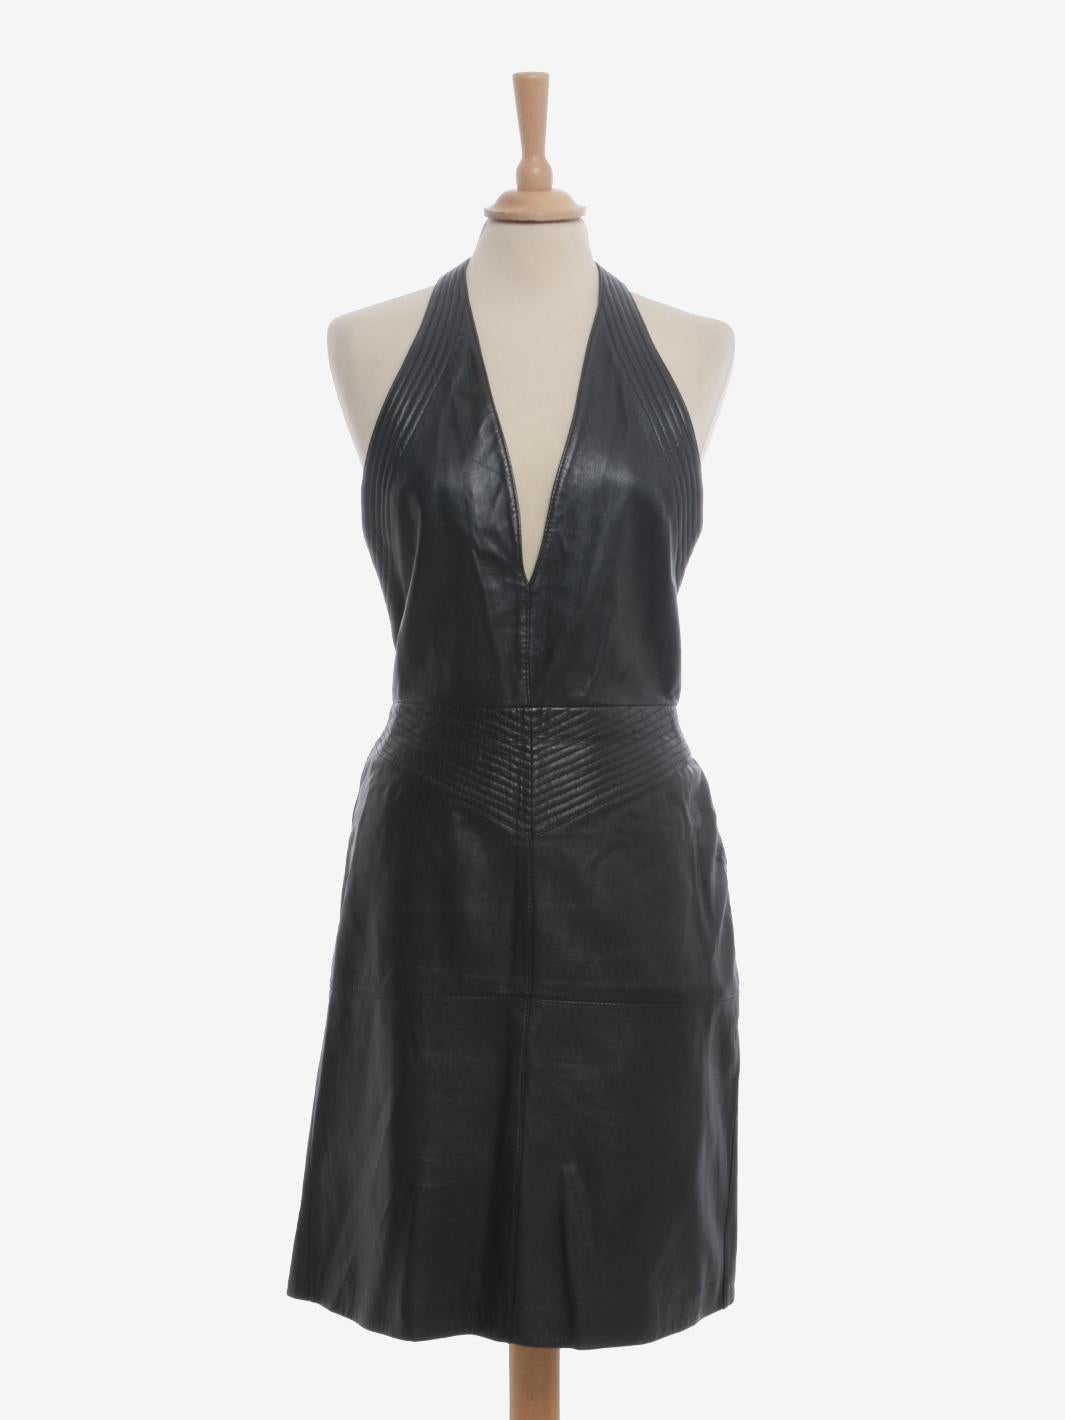 Gianfranco Ferré Leather Midi Dress is a rare Ferrè garment from the 1980s made of very soft leather and decorated with stitching, especially at the waist creating a shape that define the silhouette. V-neckline with lacing behind the neck that